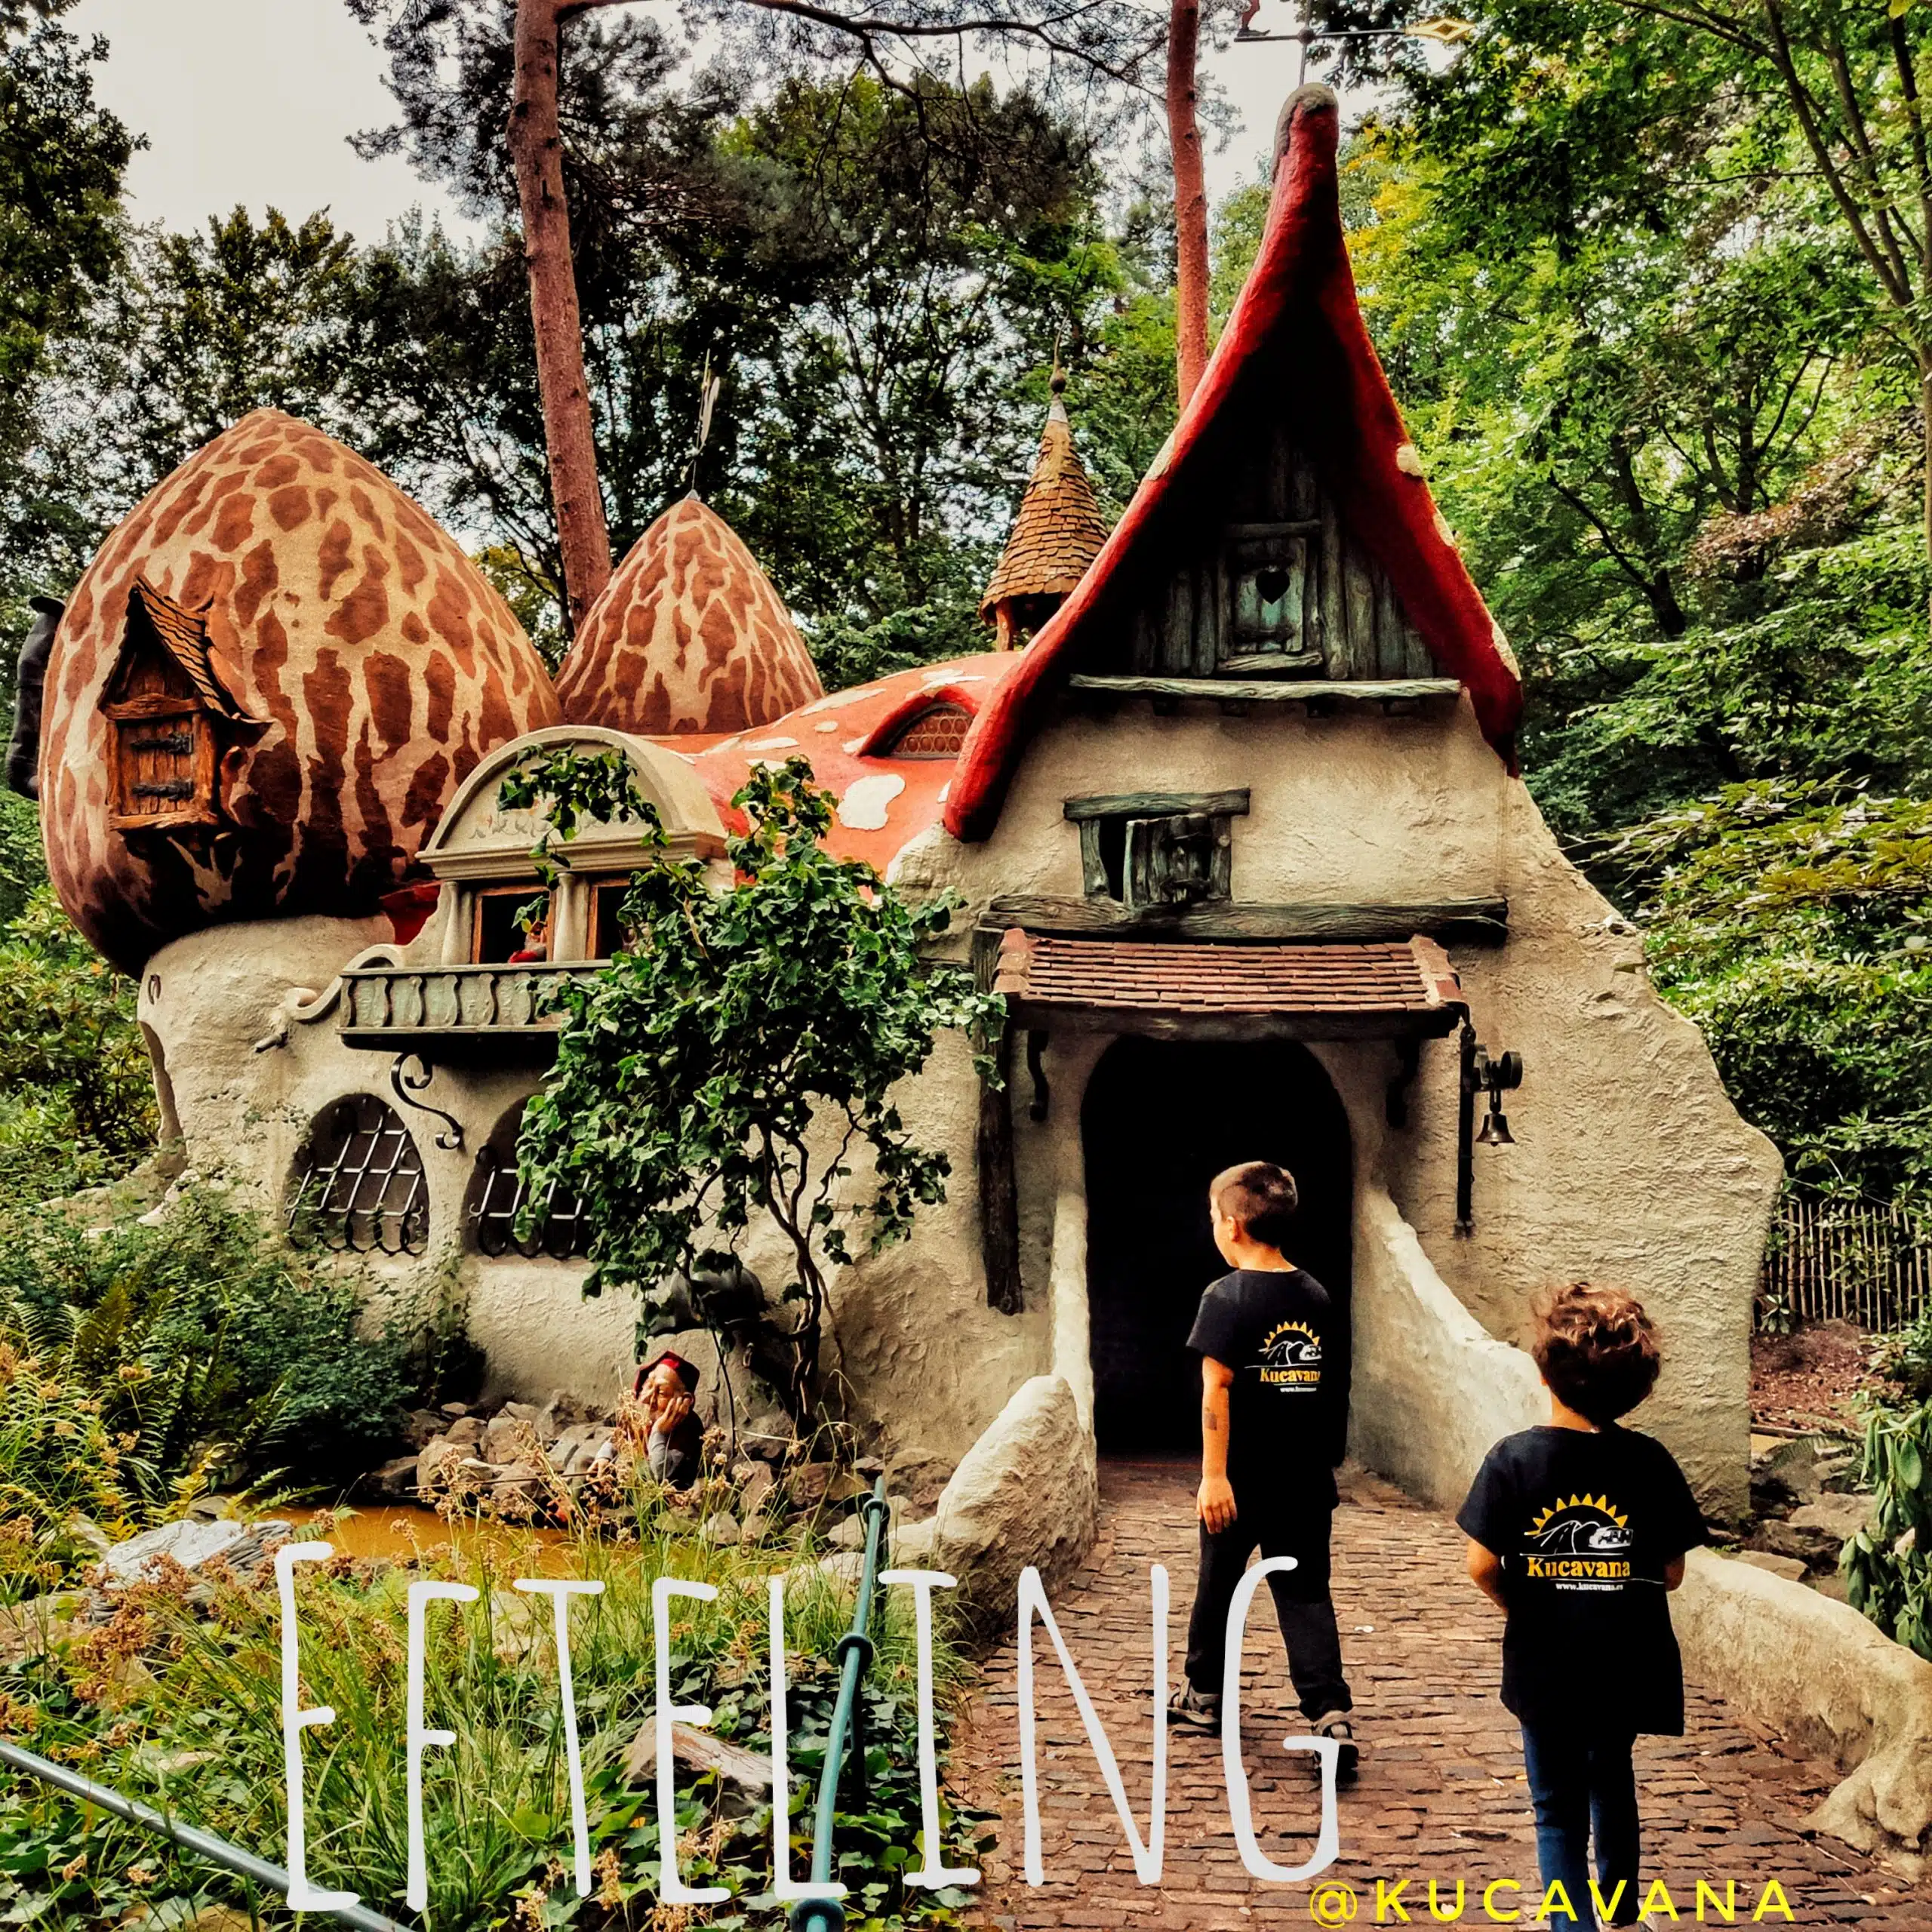 Right now you are looking at The best amusement park in Holland and the oldest in Europe: Efteling